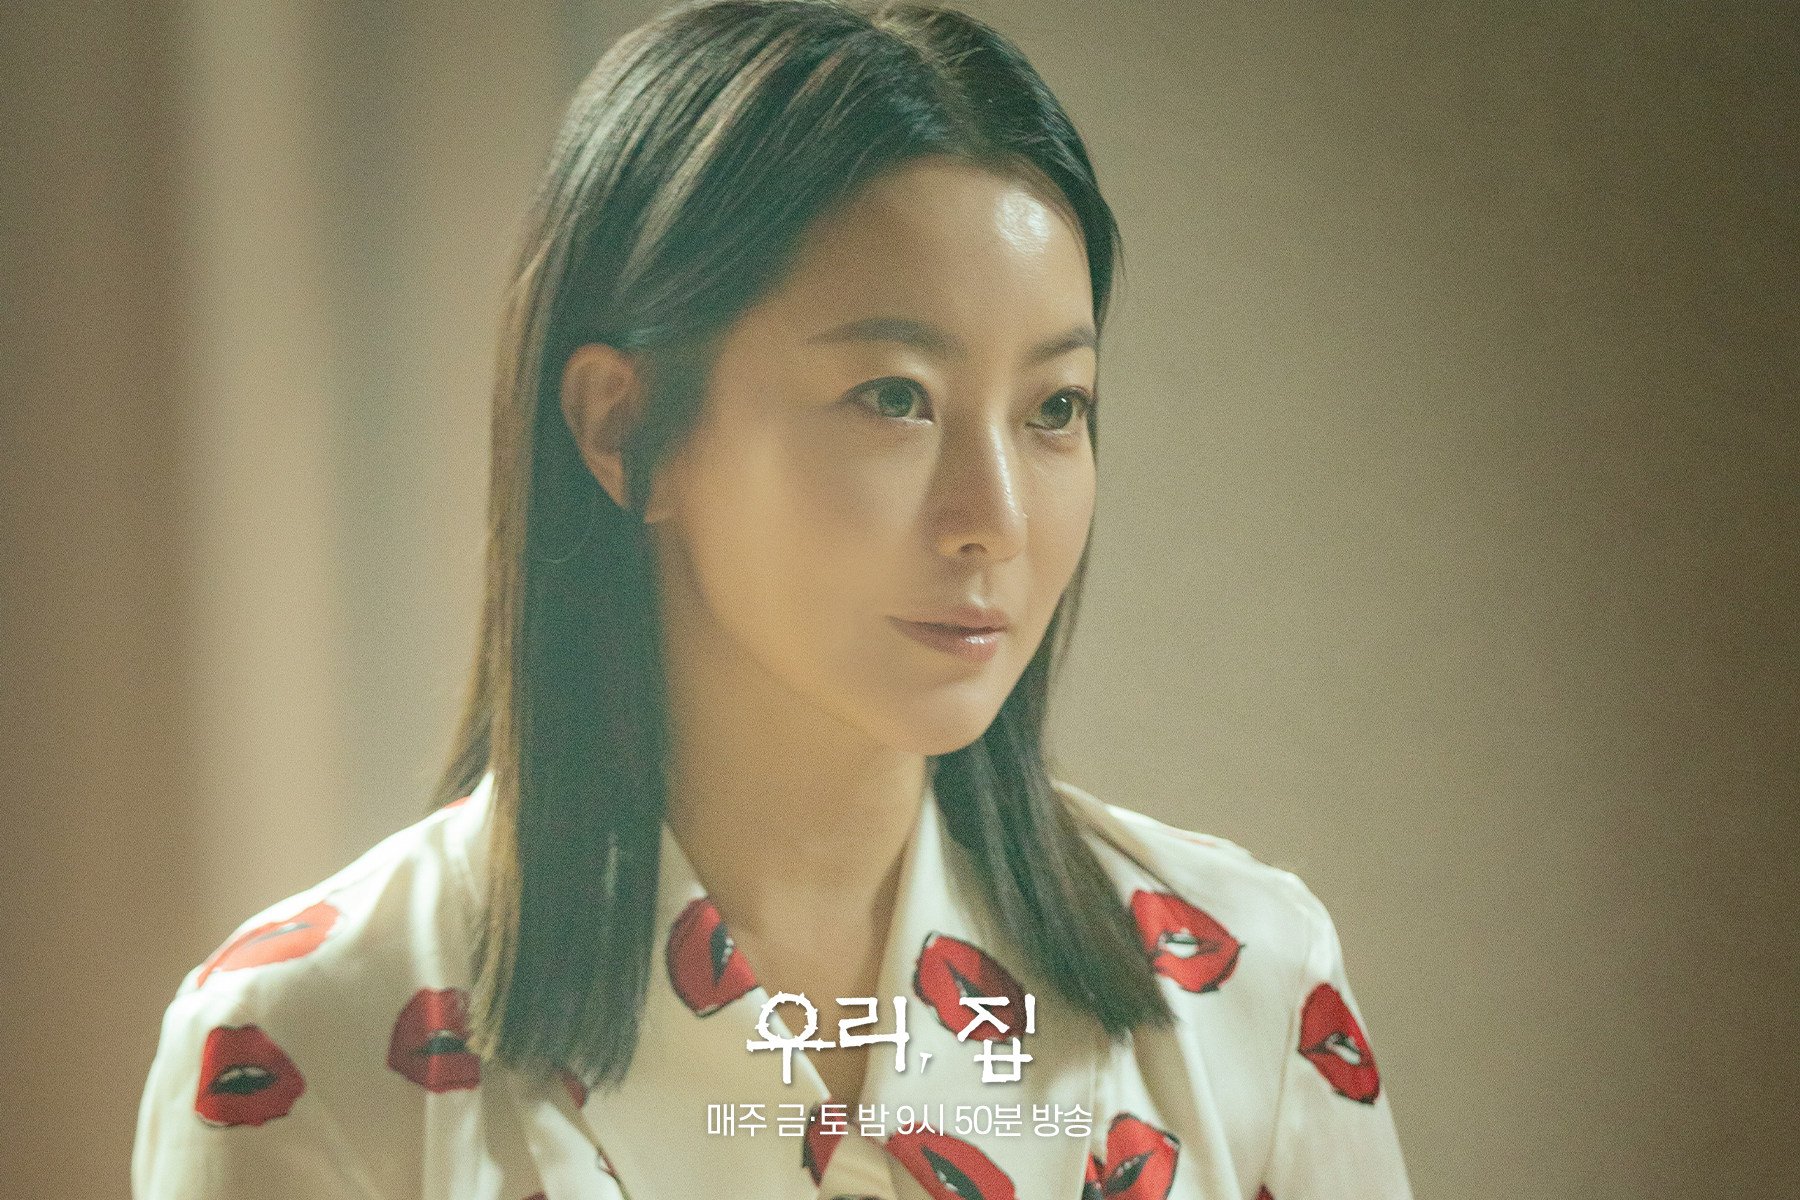 Kim Hee-sun as popular psychologist Young-won in a still from Bitter Sweet Hell.